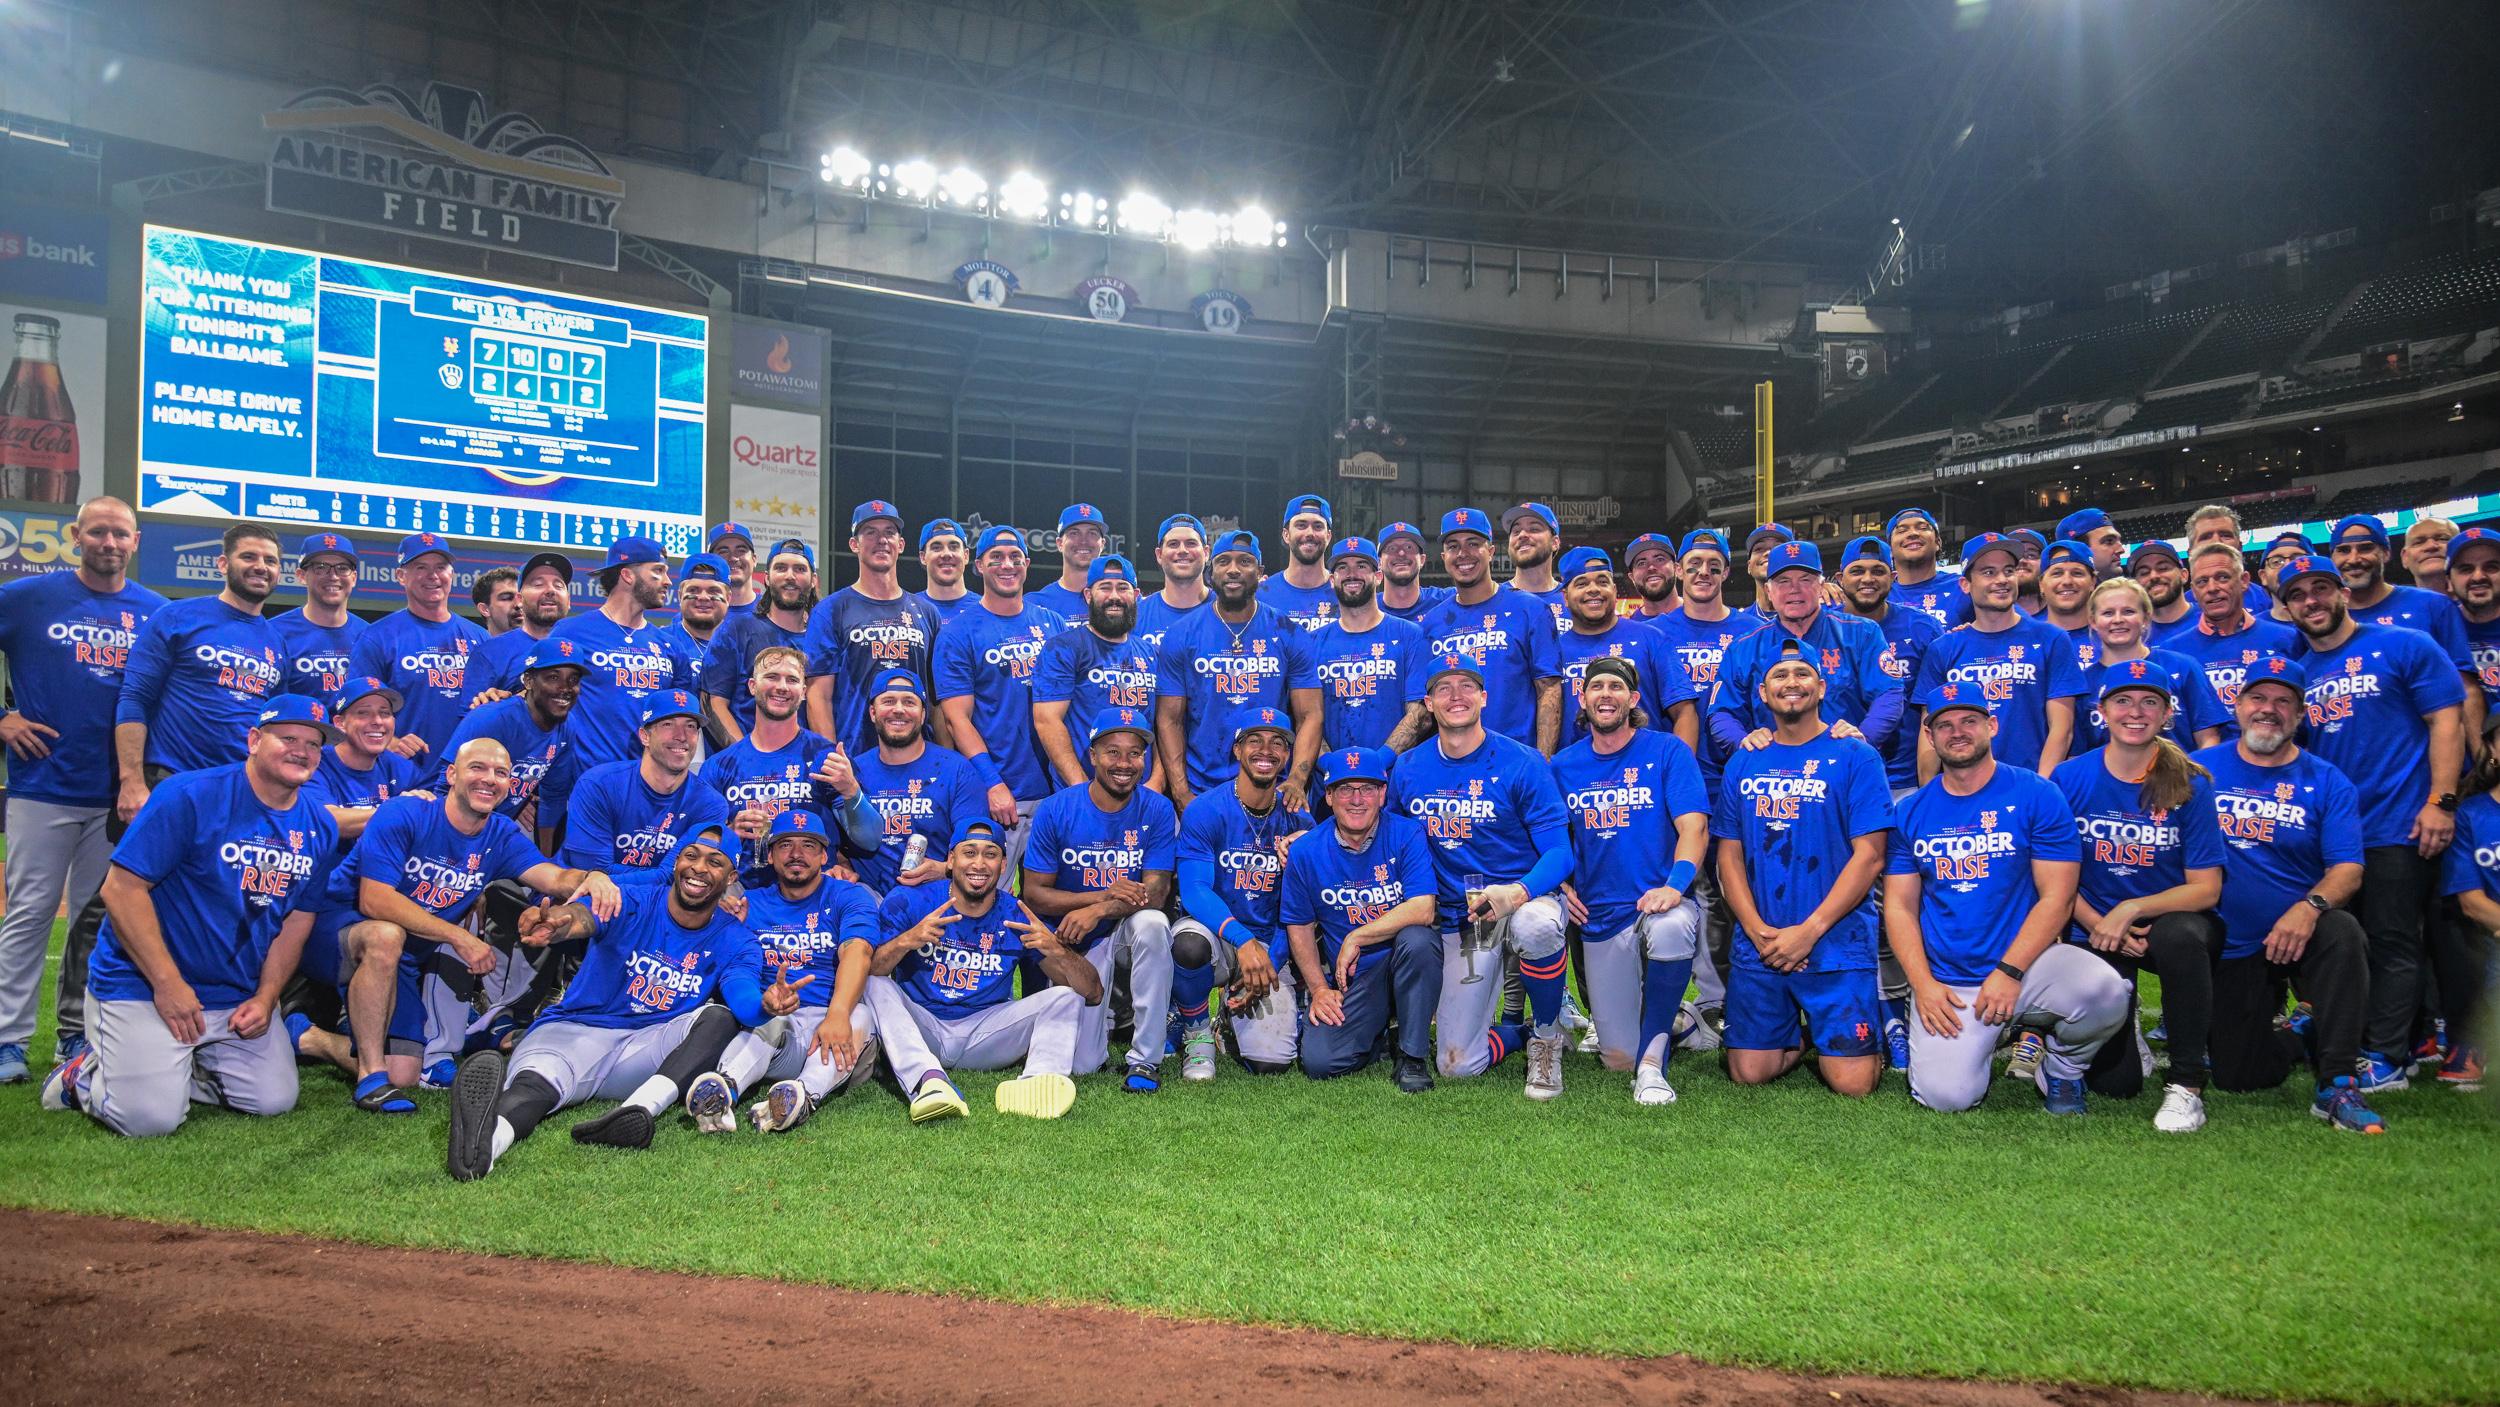 The 2022 Mets celebrate clinching a playoff spot / Benny Sieu - USA TODAY Sports